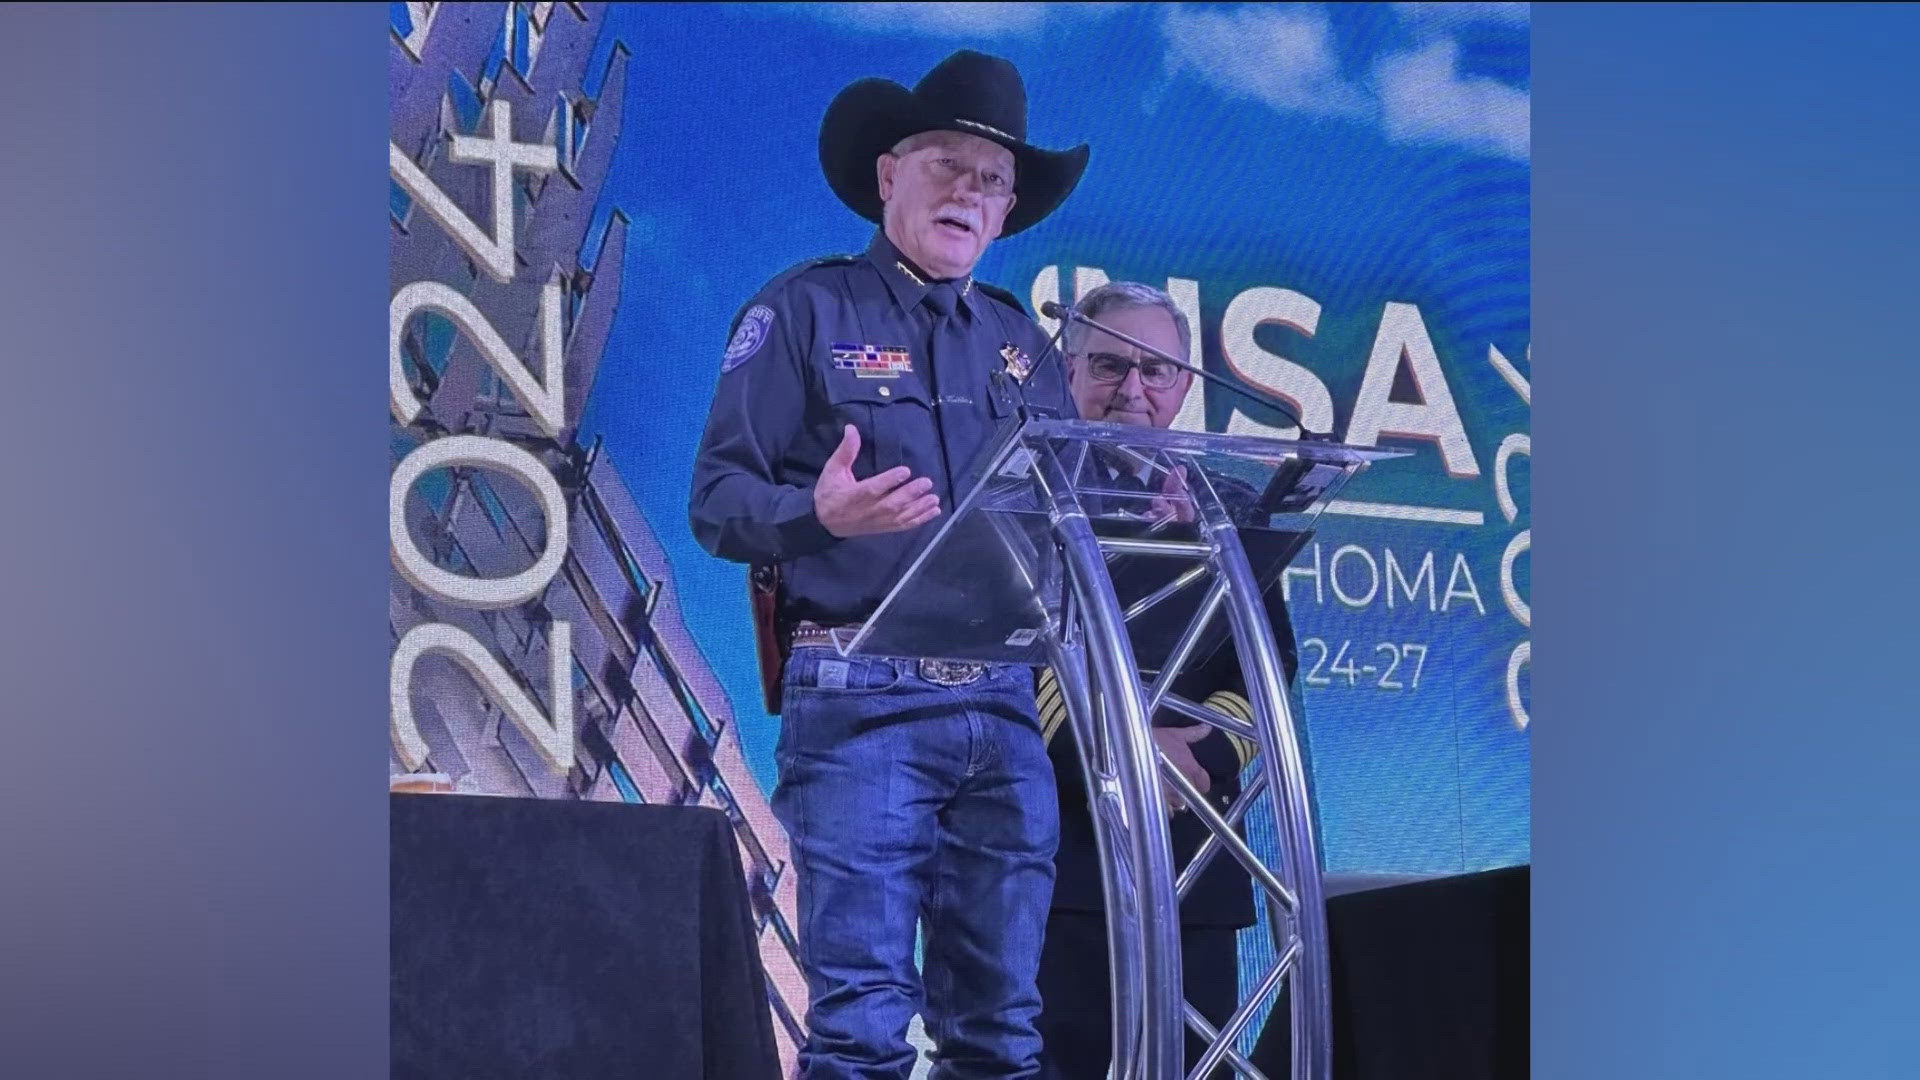 Kieran Donahue was sworn in as president of the National Sheriffs' Association on Thursday. He is the first Idaho sheriff to hold the position.